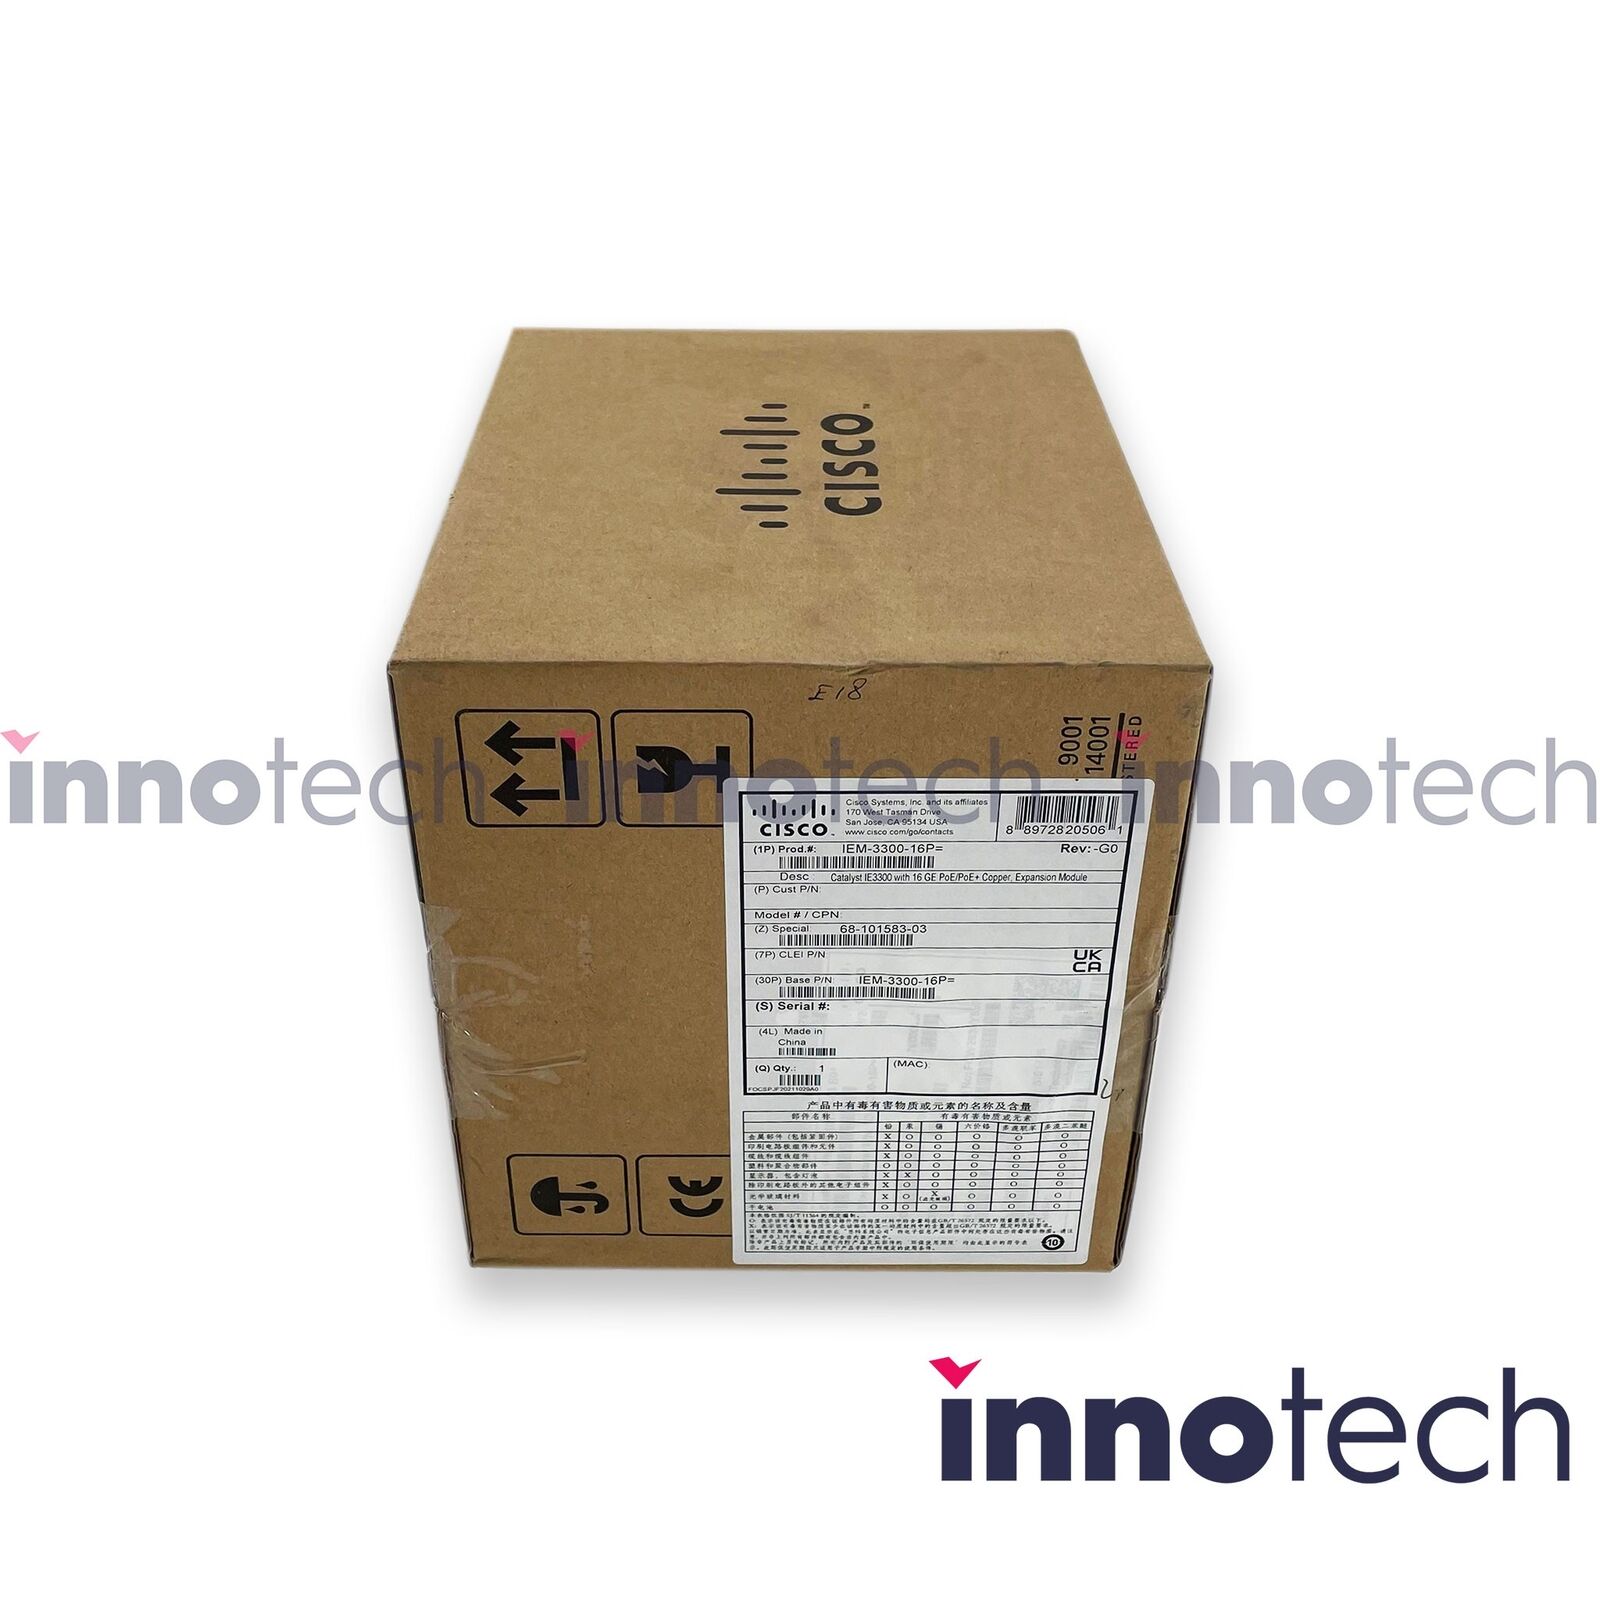 Cisco IEM-3300-16P Catalyst IE3300 Rugged Expansion Module 16 Port New Sealed